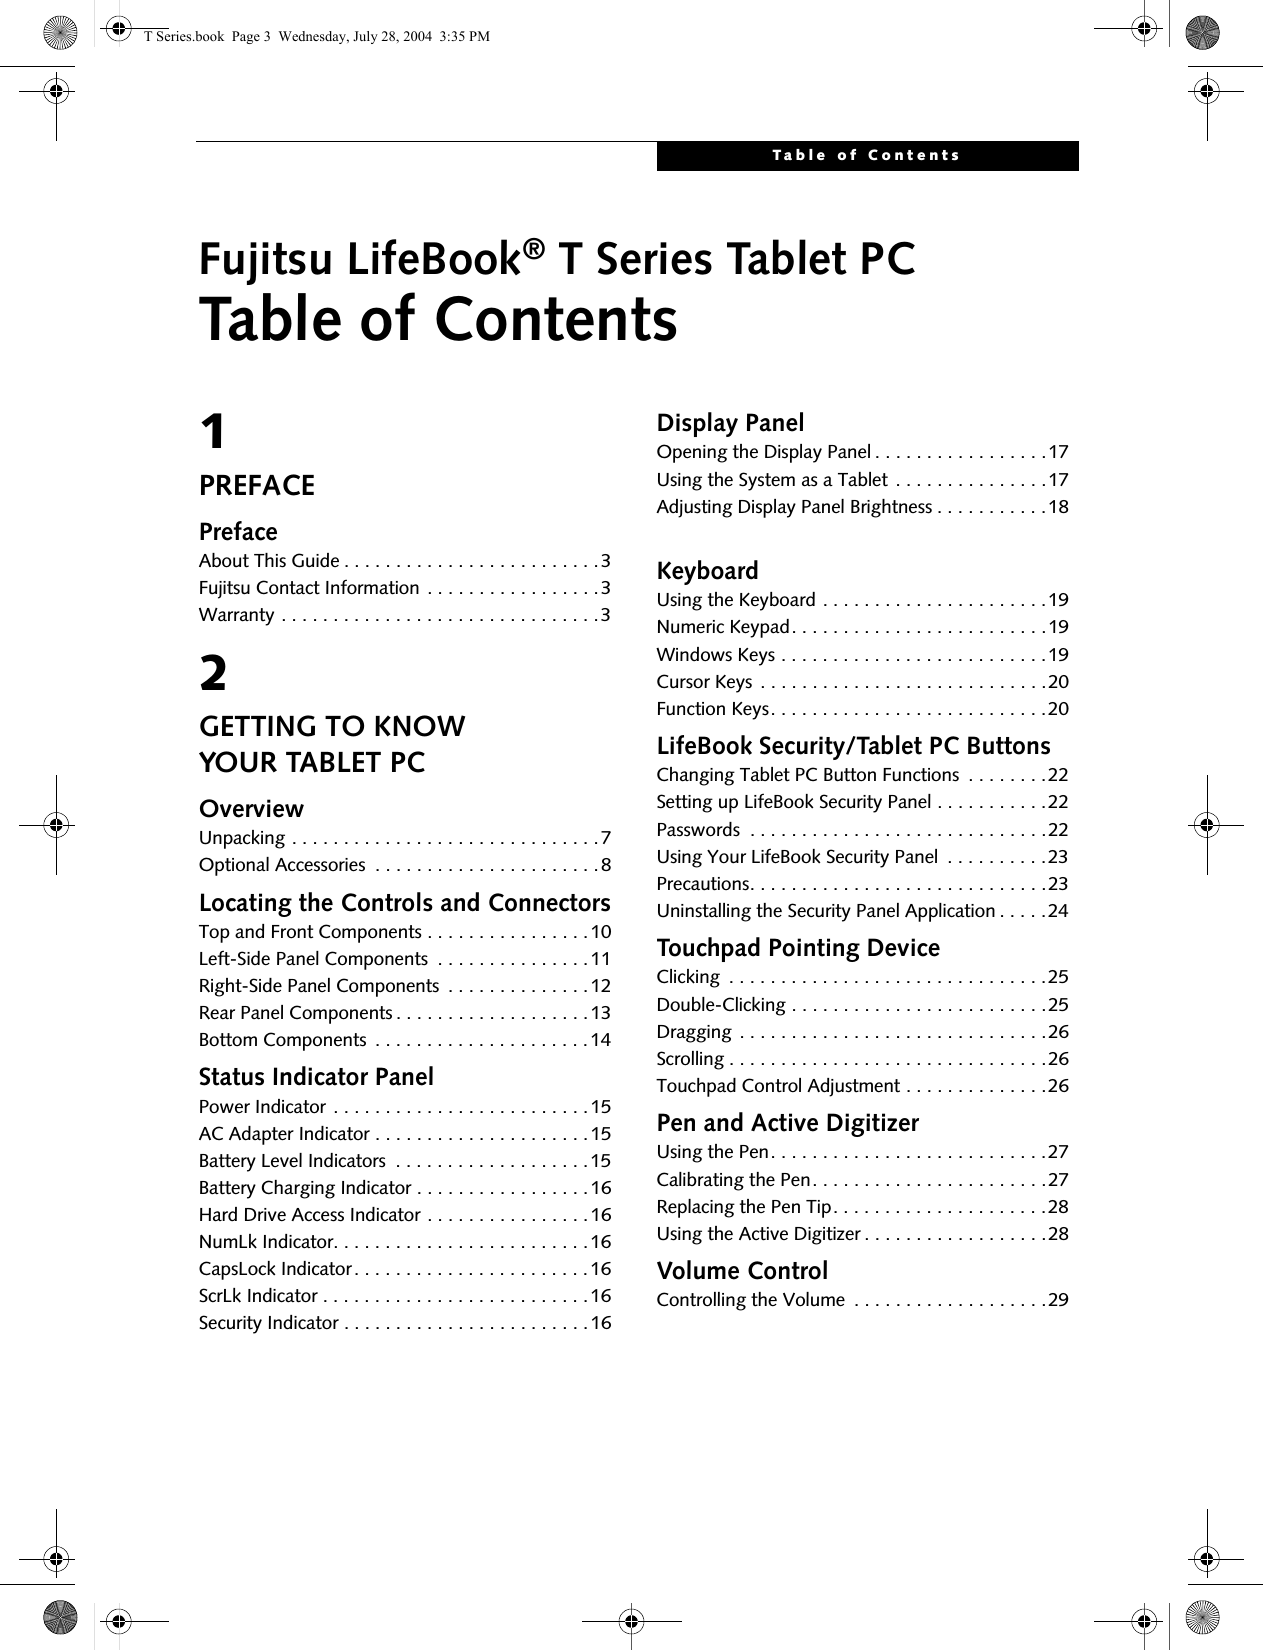 Table of ContentsFujitsu LifeBook® T Series Tablet PCTable of Contents1PREFACEPrefaceAbout This Guide . . . . . . . . . . . . . . . . . . . . . . . . .3Fujitsu Contact Information . . . . . . . . . . . . . . . . .3Warranty . . . . . . . . . . . . . . . . . . . . . . . . . . . . . . .32GETTING TO KNOWYOUR TABLET PCOverviewUnpacking . . . . . . . . . . . . . . . . . . . . . . . . . . . . . .7Optional Accessories  . . . . . . . . . . . . . . . . . . . . . .8Locating the Controls and ConnectorsTop and Front Components . . . . . . . . . . . . . . . .10Left-Side Panel Components  . . . . . . . . . . . . . . .11Right-Side Panel Components  . . . . . . . . . . . . . .12Rear Panel Components . . . . . . . . . . . . . . . . . . .13Bottom Components  . . . . . . . . . . . . . . . . . . . . .14Status Indicator PanelPower Indicator . . . . . . . . . . . . . . . . . . . . . . . . .15AC Adapter Indicator . . . . . . . . . . . . . . . . . . . . .15Battery Level Indicators  . . . . . . . . . . . . . . . . . . .15Battery Charging Indicator . . . . . . . . . . . . . . . . .16Hard Drive Access Indicator . . . . . . . . . . . . . . . .16NumLk Indicator. . . . . . . . . . . . . . . . . . . . . . . . .16CapsLock Indicator. . . . . . . . . . . . . . . . . . . . . . .16ScrLk Indicator . . . . . . . . . . . . . . . . . . . . . . . . . .16Security Indicator . . . . . . . . . . . . . . . . . . . . . . . .16Display PanelOpening the Display Panel . . . . . . . . . . . . . . . . .17Using the System as a Tablet . . . . . . . . . . . . . . .17Adjusting Display Panel Brightness . . . . . . . . . . .18KeyboardUsing the Keyboard . . . . . . . . . . . . . . . . . . . . . .19Numeric Keypad. . . . . . . . . . . . . . . . . . . . . . . . .19Windows Keys . . . . . . . . . . . . . . . . . . . . . . . . . .19Cursor Keys . . . . . . . . . . . . . . . . . . . . . . . . . . . .20Function Keys. . . . . . . . . . . . . . . . . . . . . . . . . . .20LifeBook Security/Tablet PC ButtonsChanging Tablet PC Button Functions  . . . . . . . .22Setting up LifeBook Security Panel . . . . . . . . . . .22Passwords  . . . . . . . . . . . . . . . . . . . . . . . . . . . . .22Using Your LifeBook Security Panel  . . . . . . . . . .23Precautions. . . . . . . . . . . . . . . . . . . . . . . . . . . . .23Uninstalling the Security Panel Application . . . . .24Touchpad Pointing DeviceClicking  . . . . . . . . . . . . . . . . . . . . . . . . . . . . . . .25Double-Clicking . . . . . . . . . . . . . . . . . . . . . . . . .25Dragging . . . . . . . . . . . . . . . . . . . . . . . . . . . . . .26Scrolling . . . . . . . . . . . . . . . . . . . . . . . . . . . . . . .26Touchpad Control Adjustment . . . . . . . . . . . . . .26Pen and Active DigitizerUsing the Pen. . . . . . . . . . . . . . . . . . . . . . . . . . .27Calibrating the Pen. . . . . . . . . . . . . . . . . . . . . . .27Replacing the Pen Tip. . . . . . . . . . . . . . . . . . . . .28Using the Active Digitizer . . . . . . . . . . . . . . . . . .28Volume ControlControlling the Volume  . . . . . . . . . . . . . . . . . . .29T Series.book  Page 3  Wednesday, July 28, 2004  3:35 PM